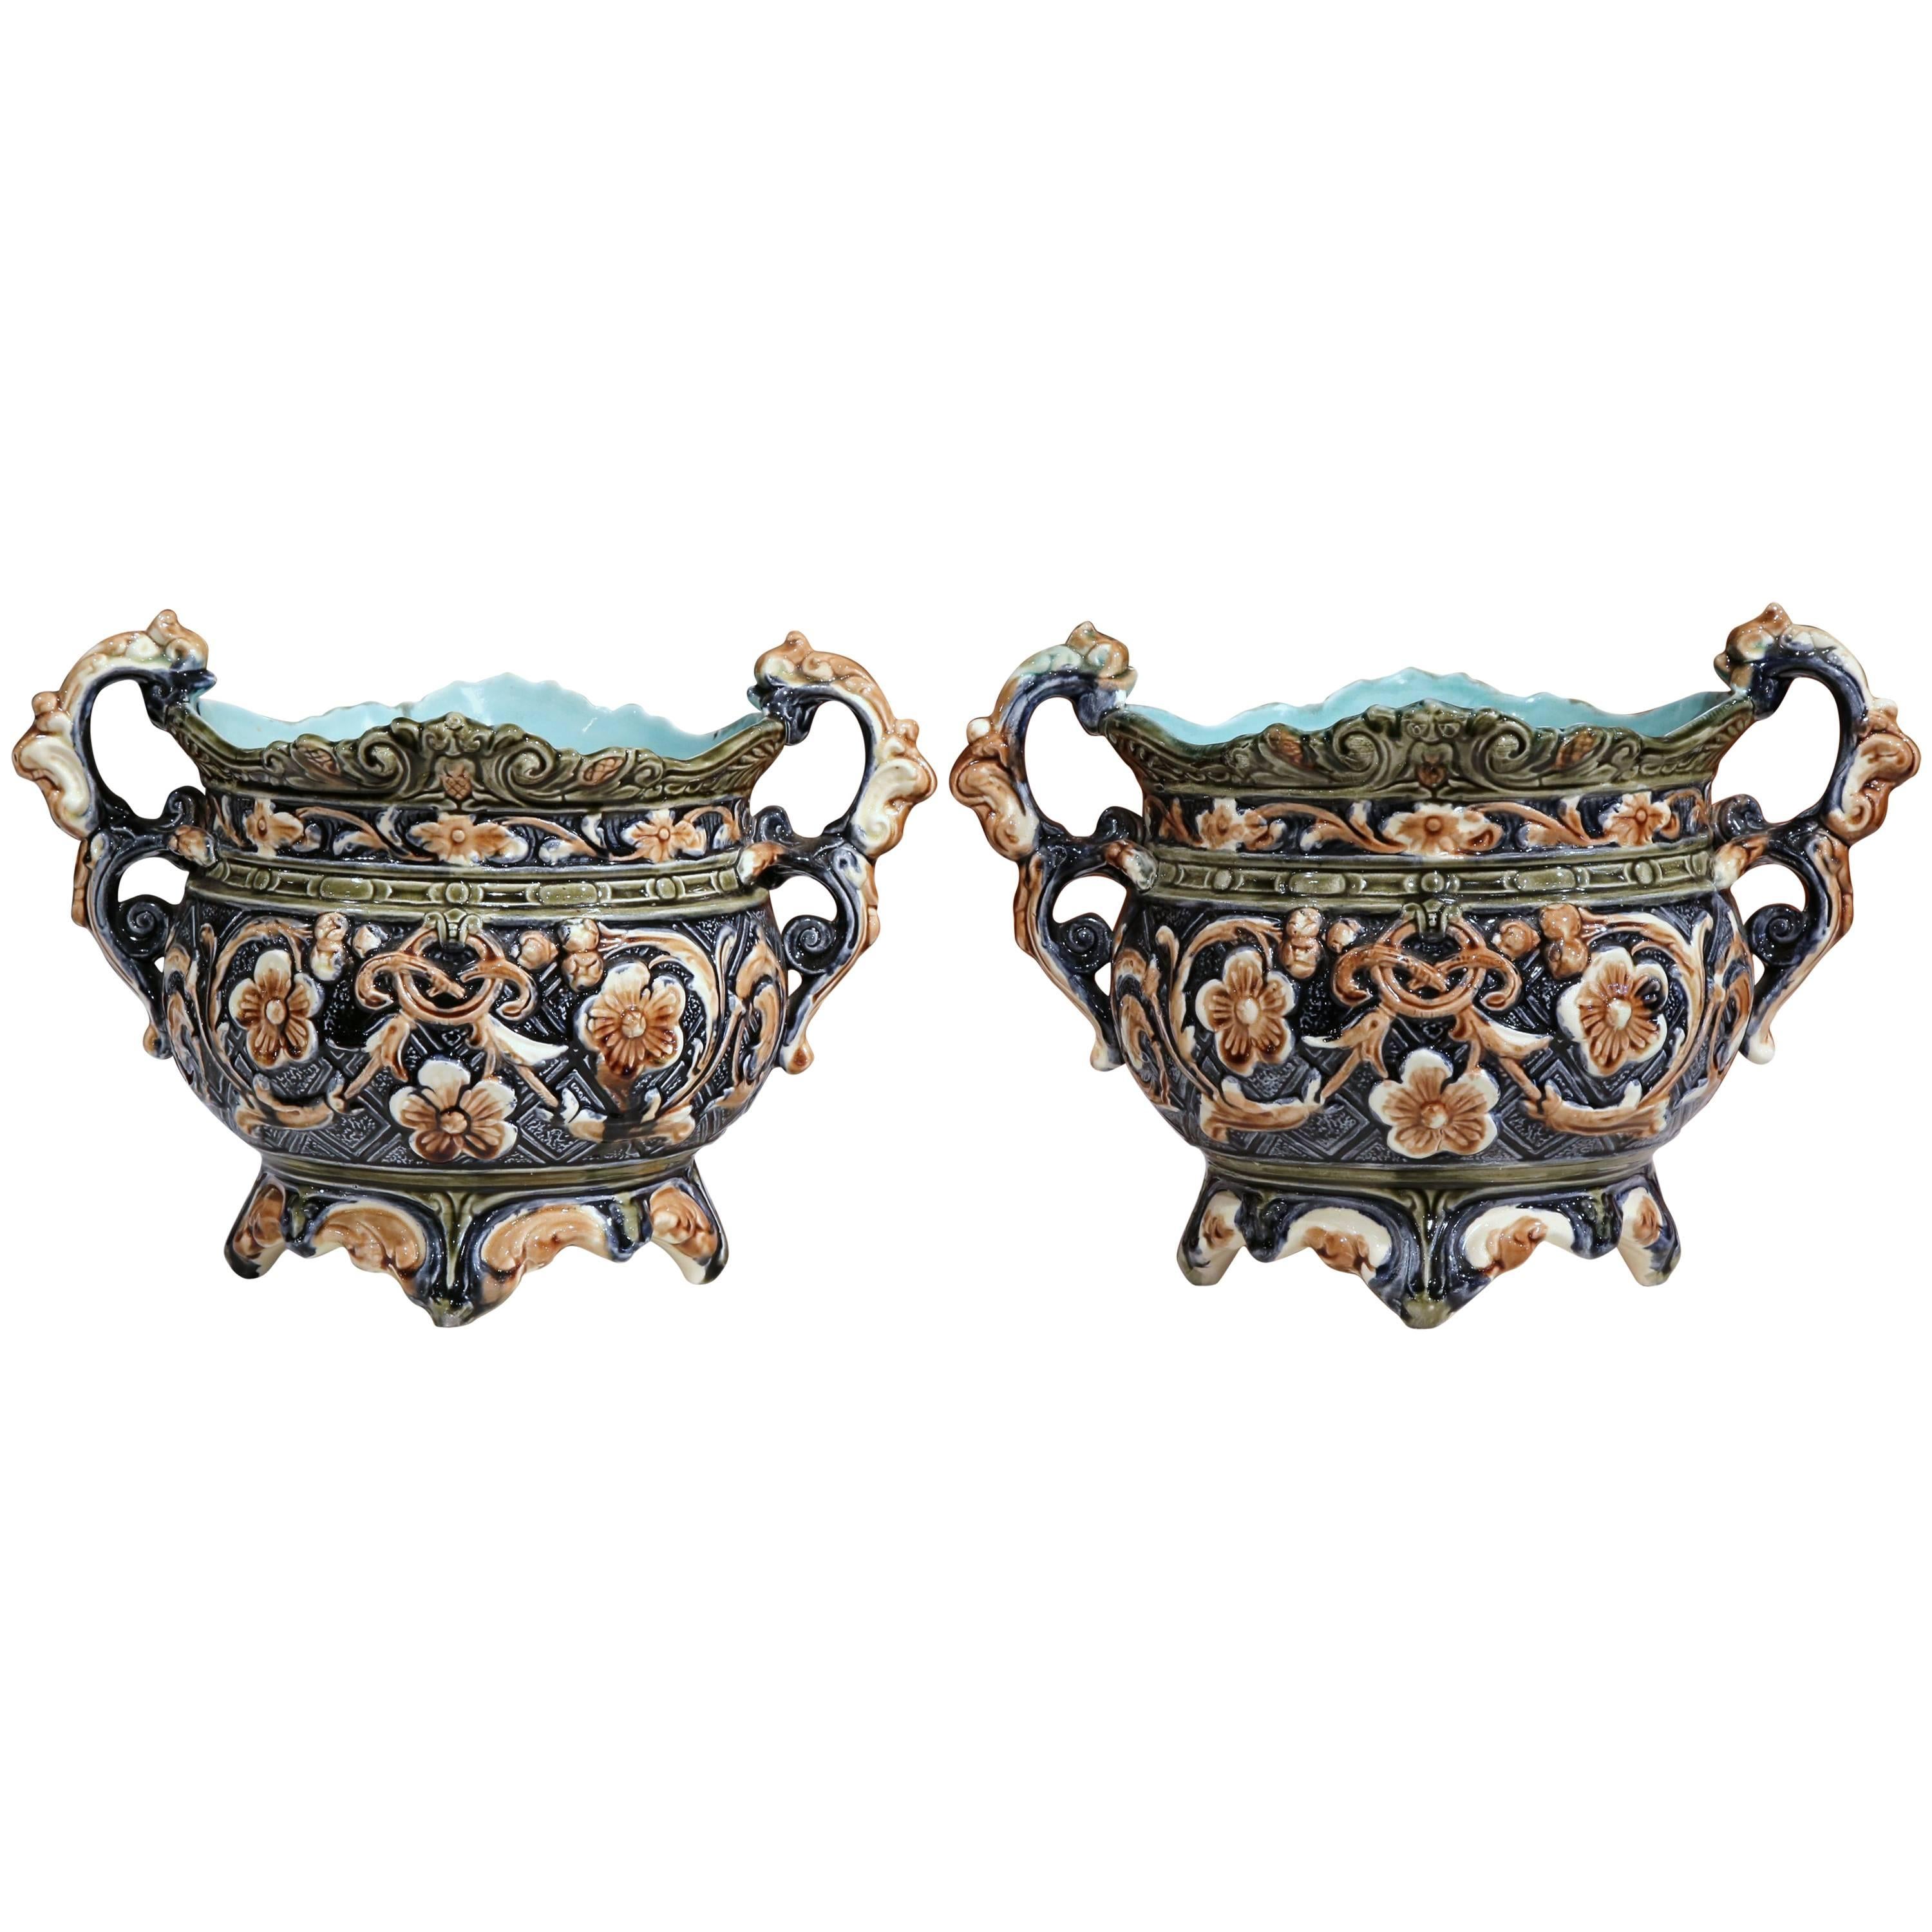 Pair of 19th Century French Hand-Painted Barbotine Cache Pots with Flower Motifs